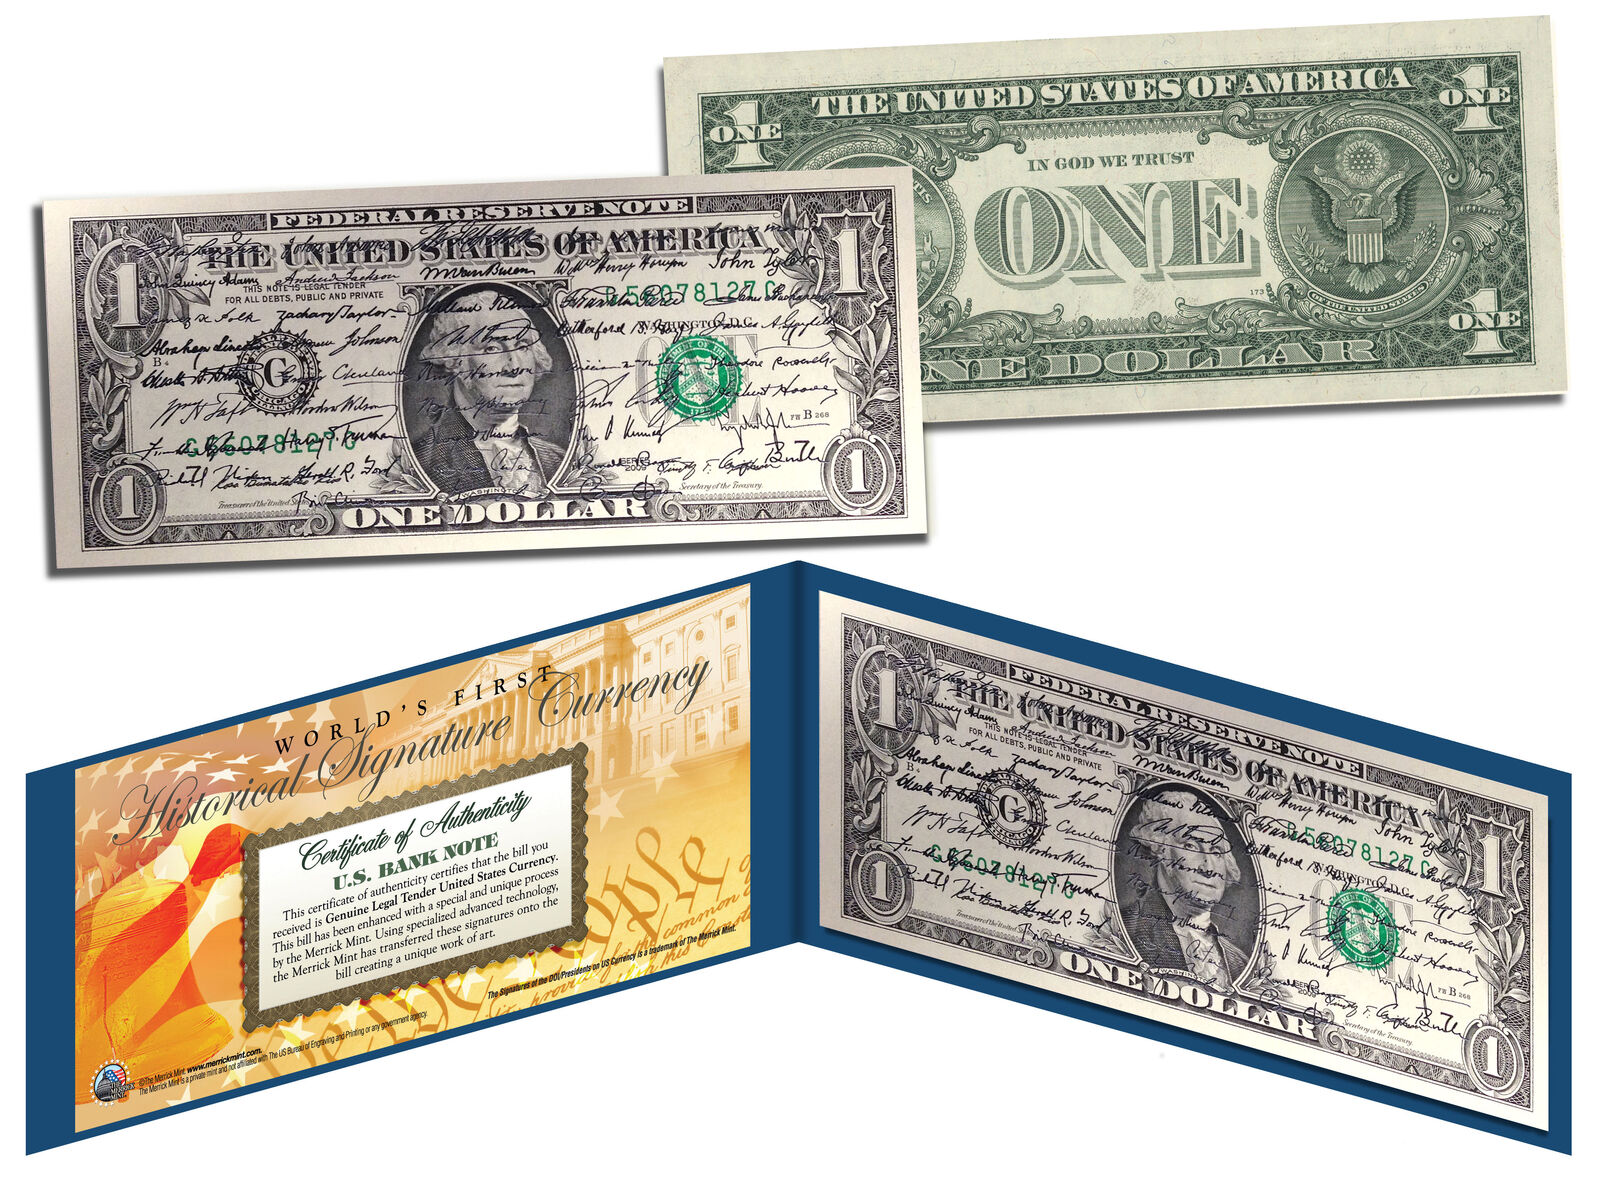 ALL 44 U.S. PRESIDENT SIGNATURES Genuine Legal Tender US $1 Bill *World's First*